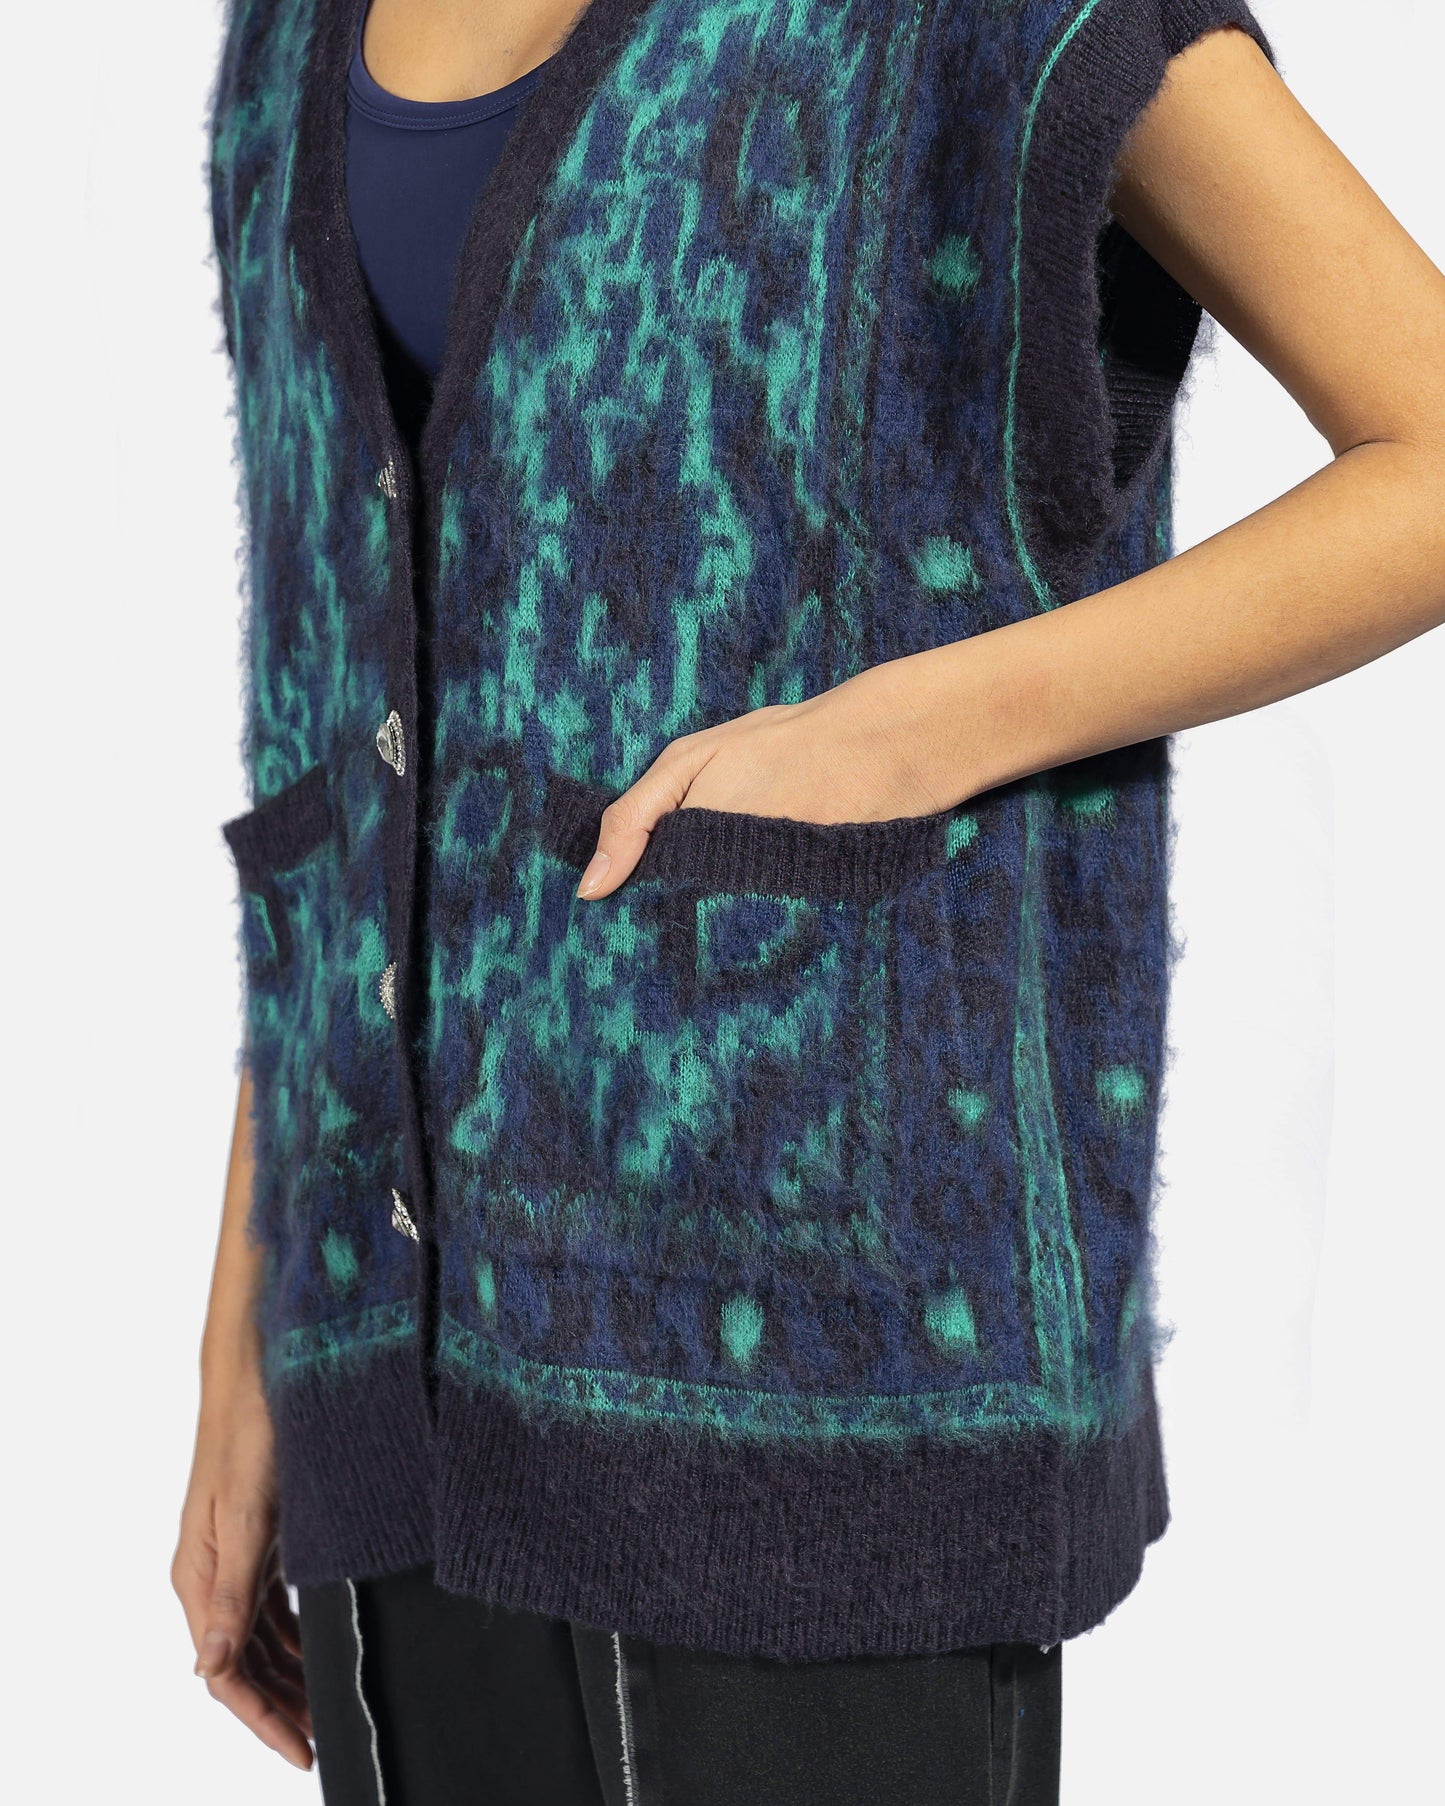 Melody Ehsani Women Tops Baba's Fuzzy Sweater Vest in Navy